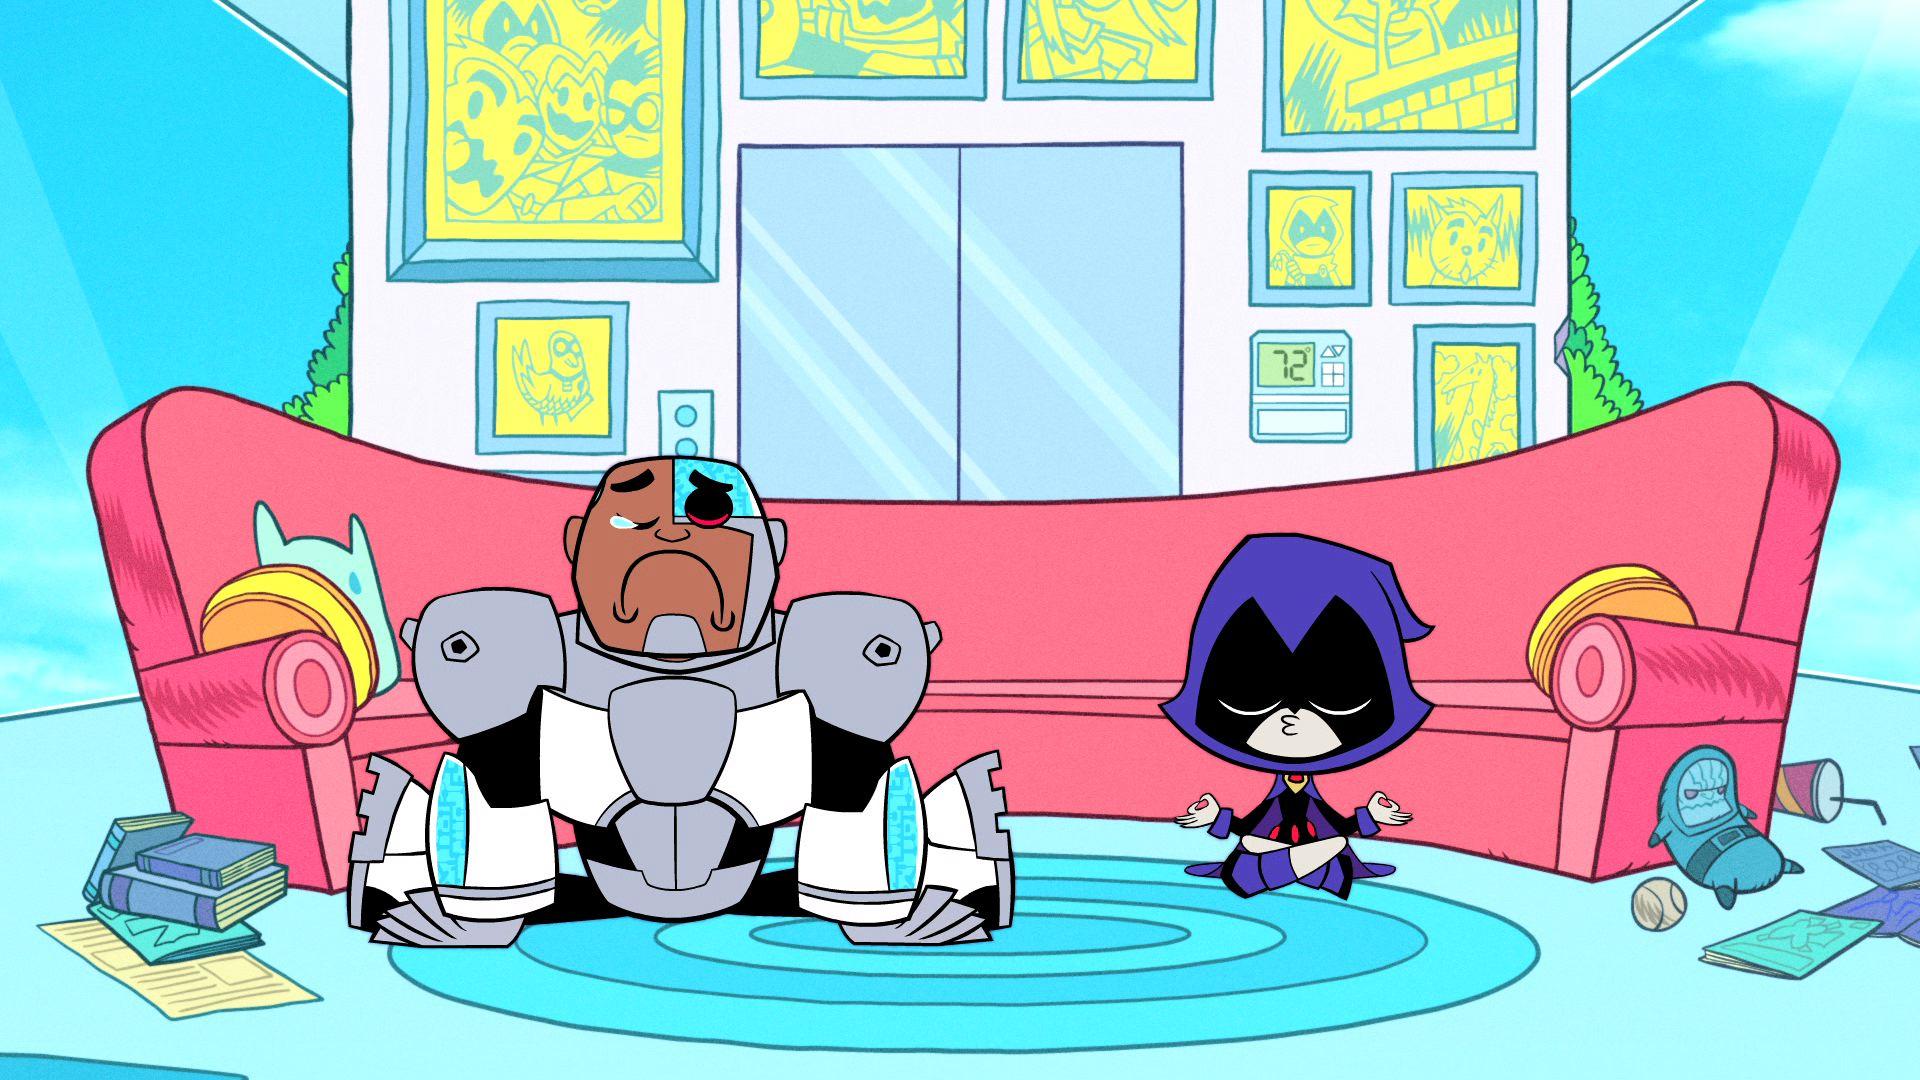 Teen Titans Go!&; Episode 3 Clips and Image